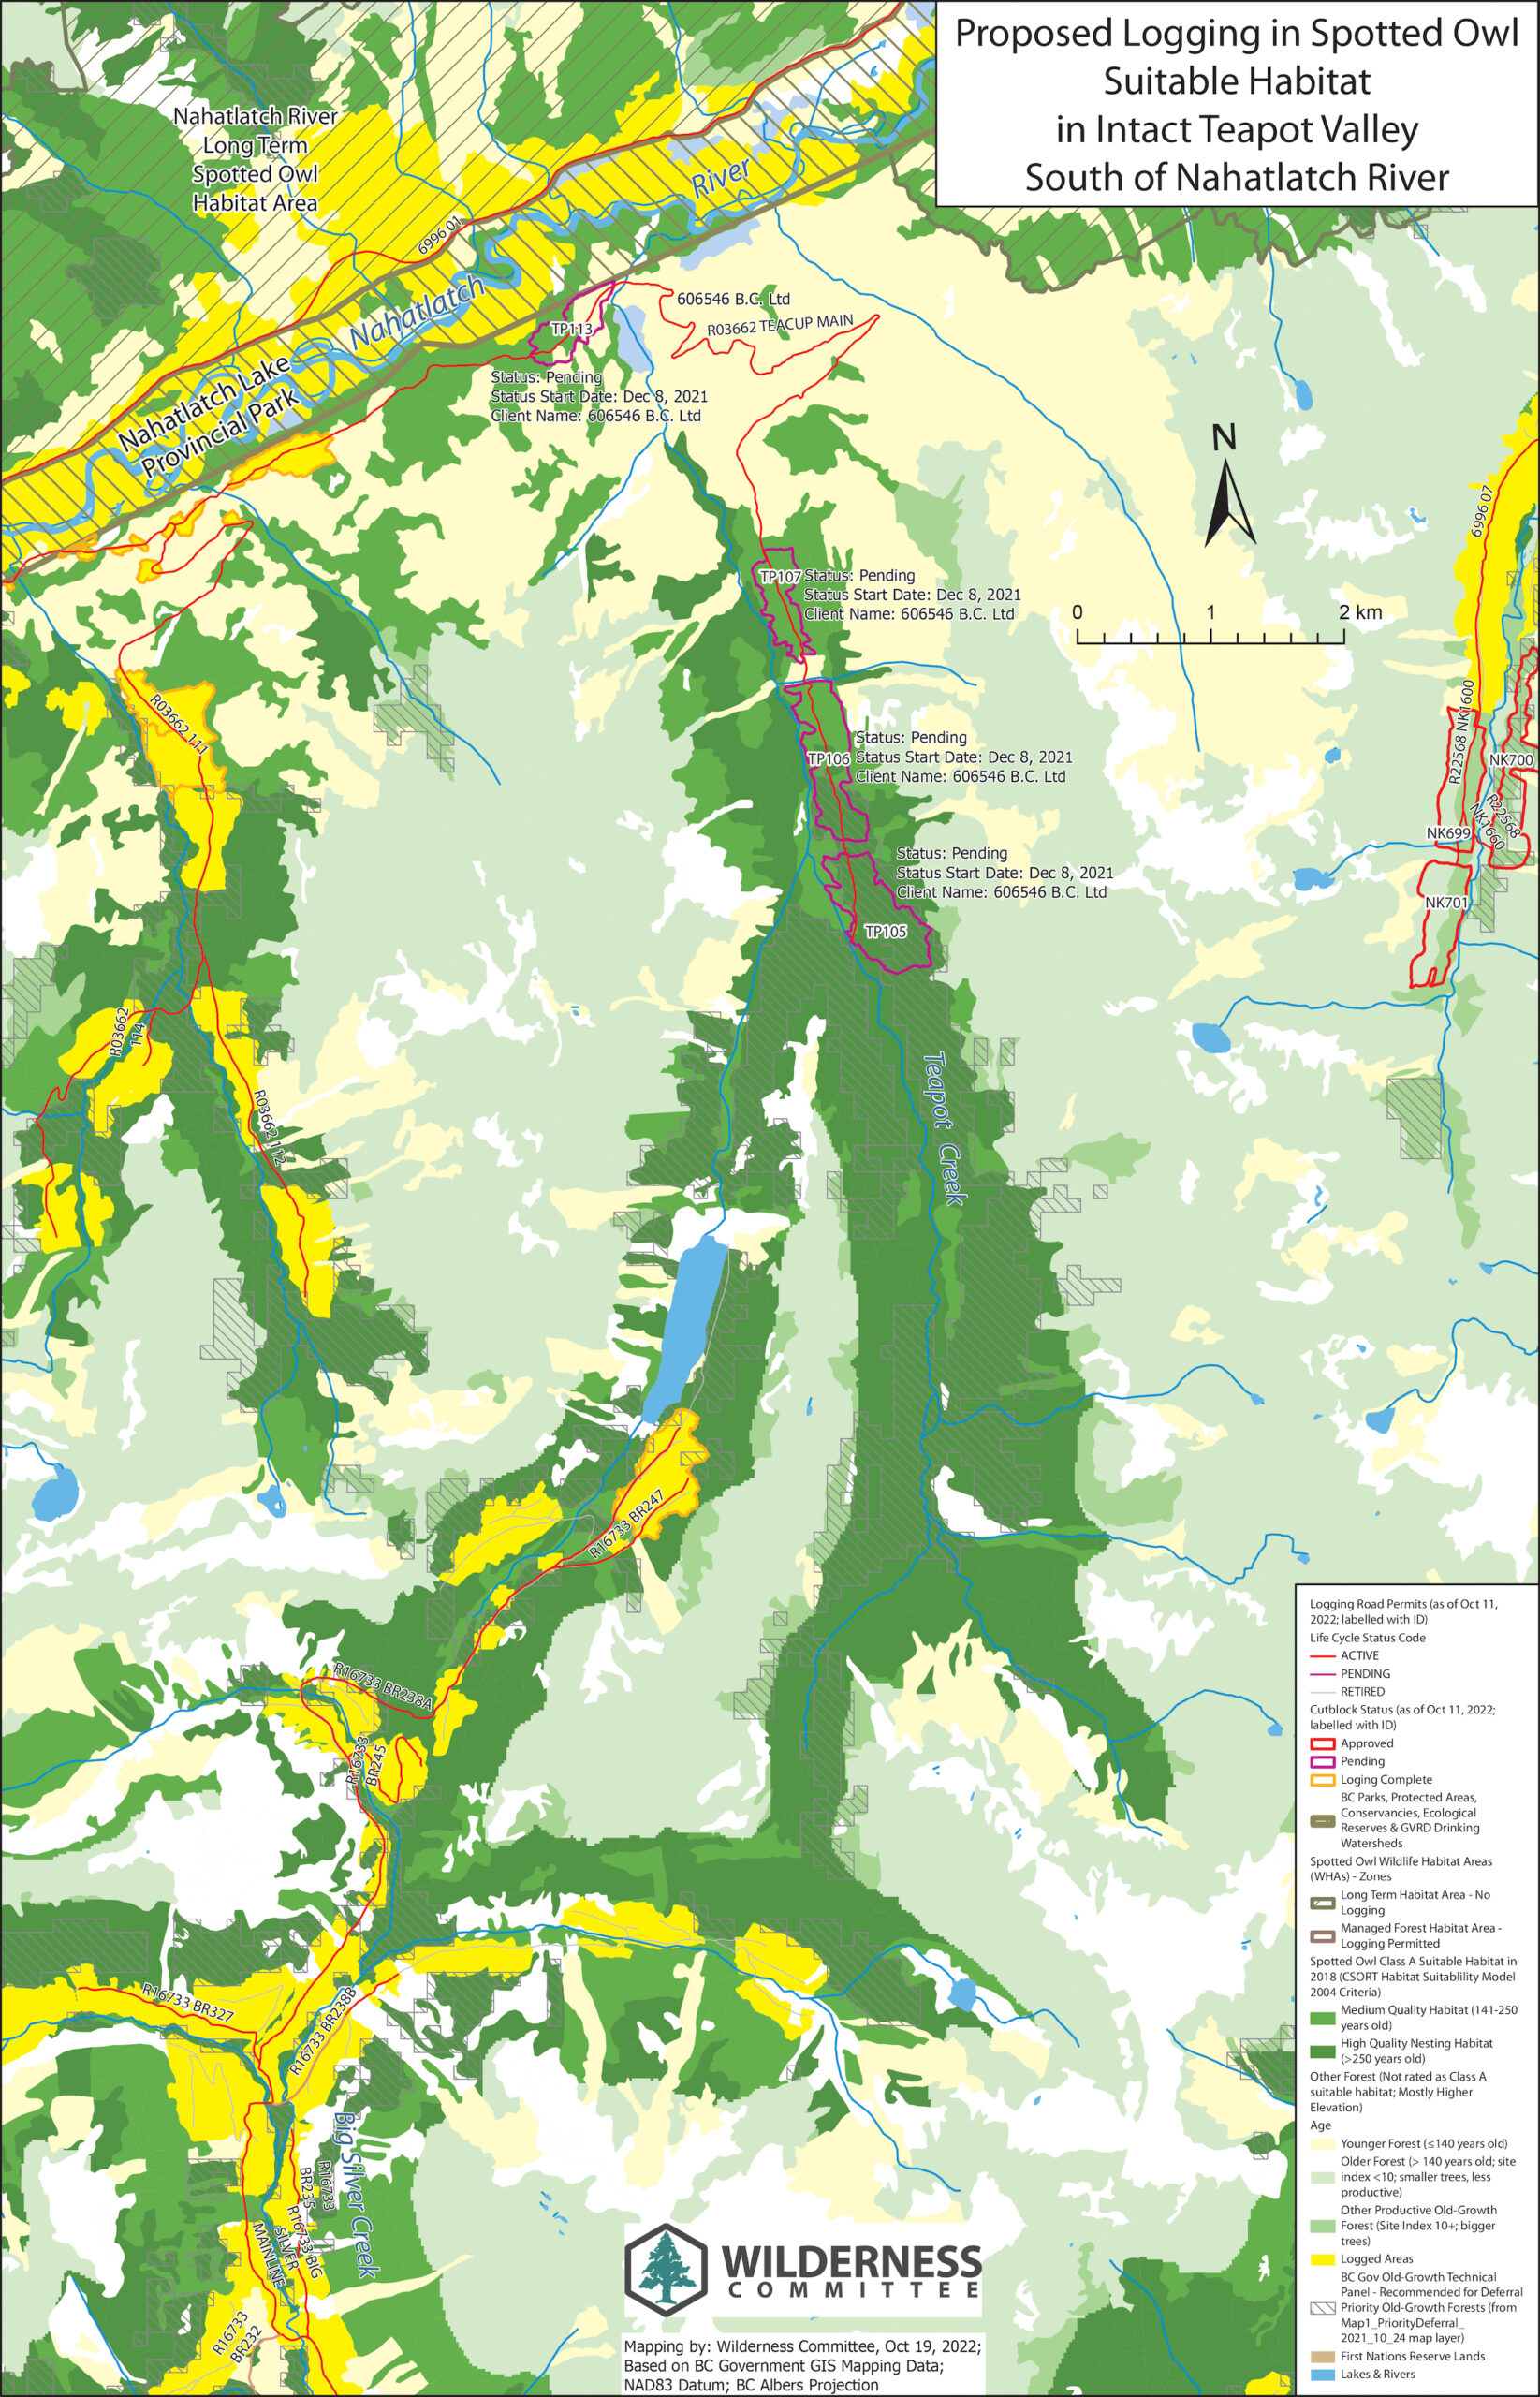 Map of proposed logging in suitable spotted owl habitat in B.C.'s Teapot Valley.